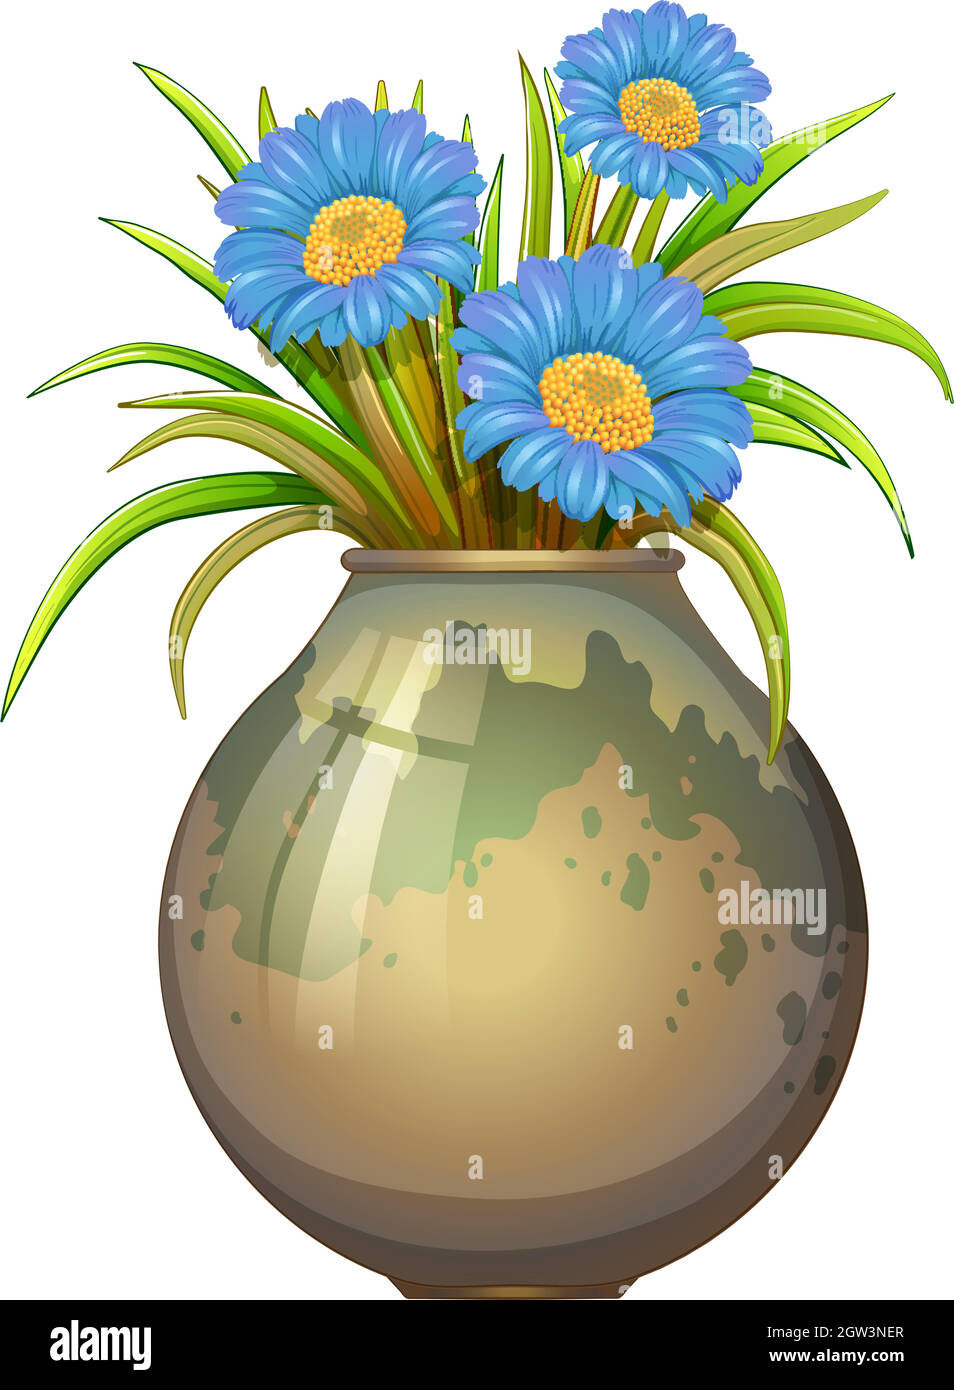 A big pot with blue flowers Stock Vector